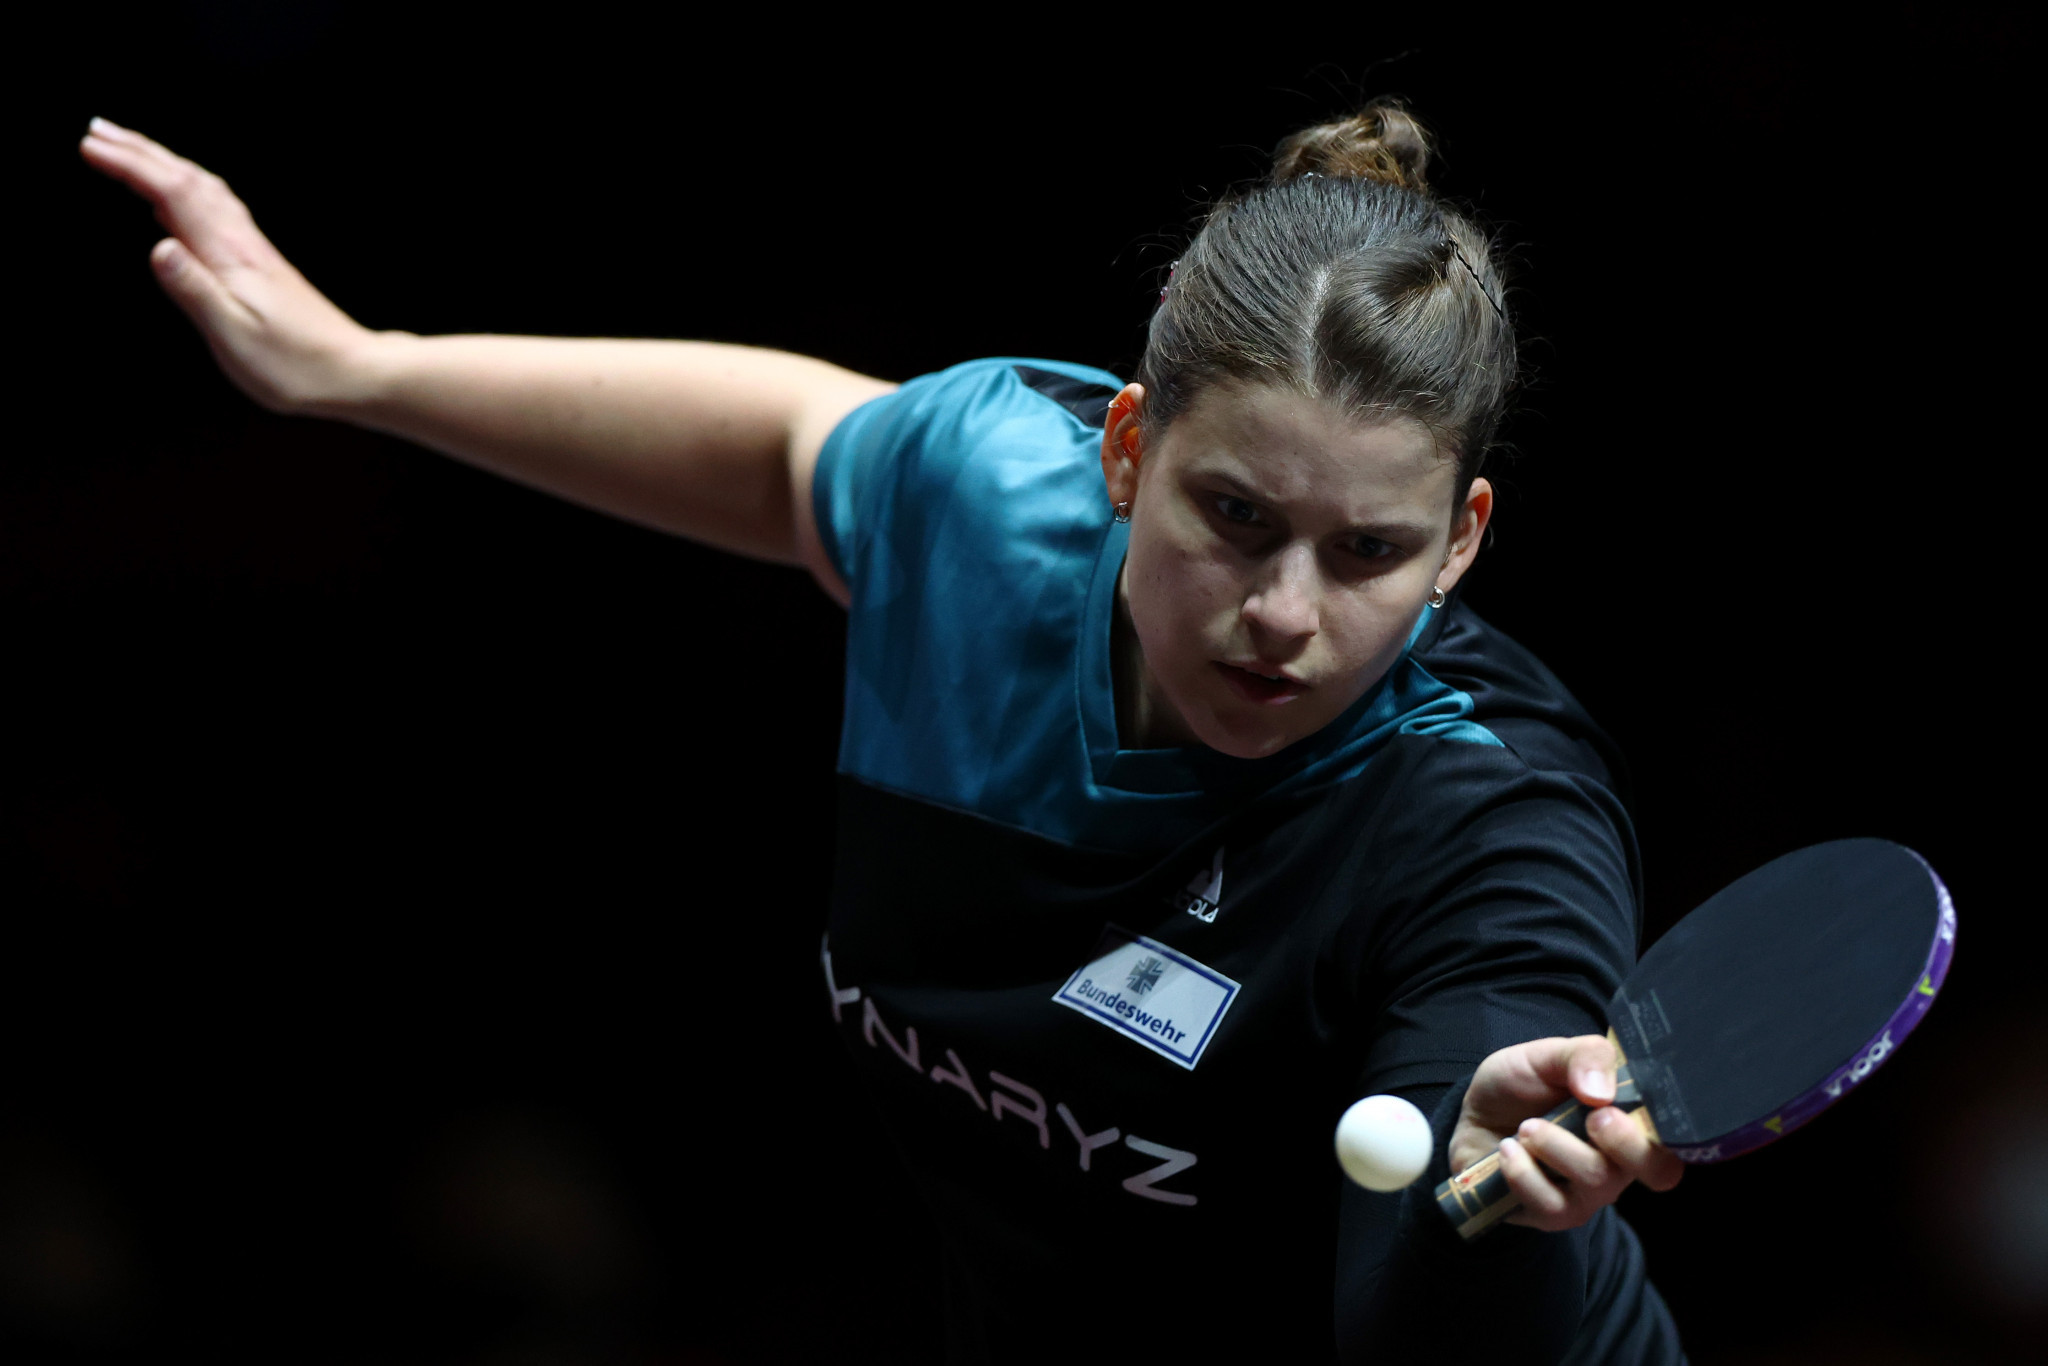 Rio 2016 silver medallist Solja retires from professional table tennis